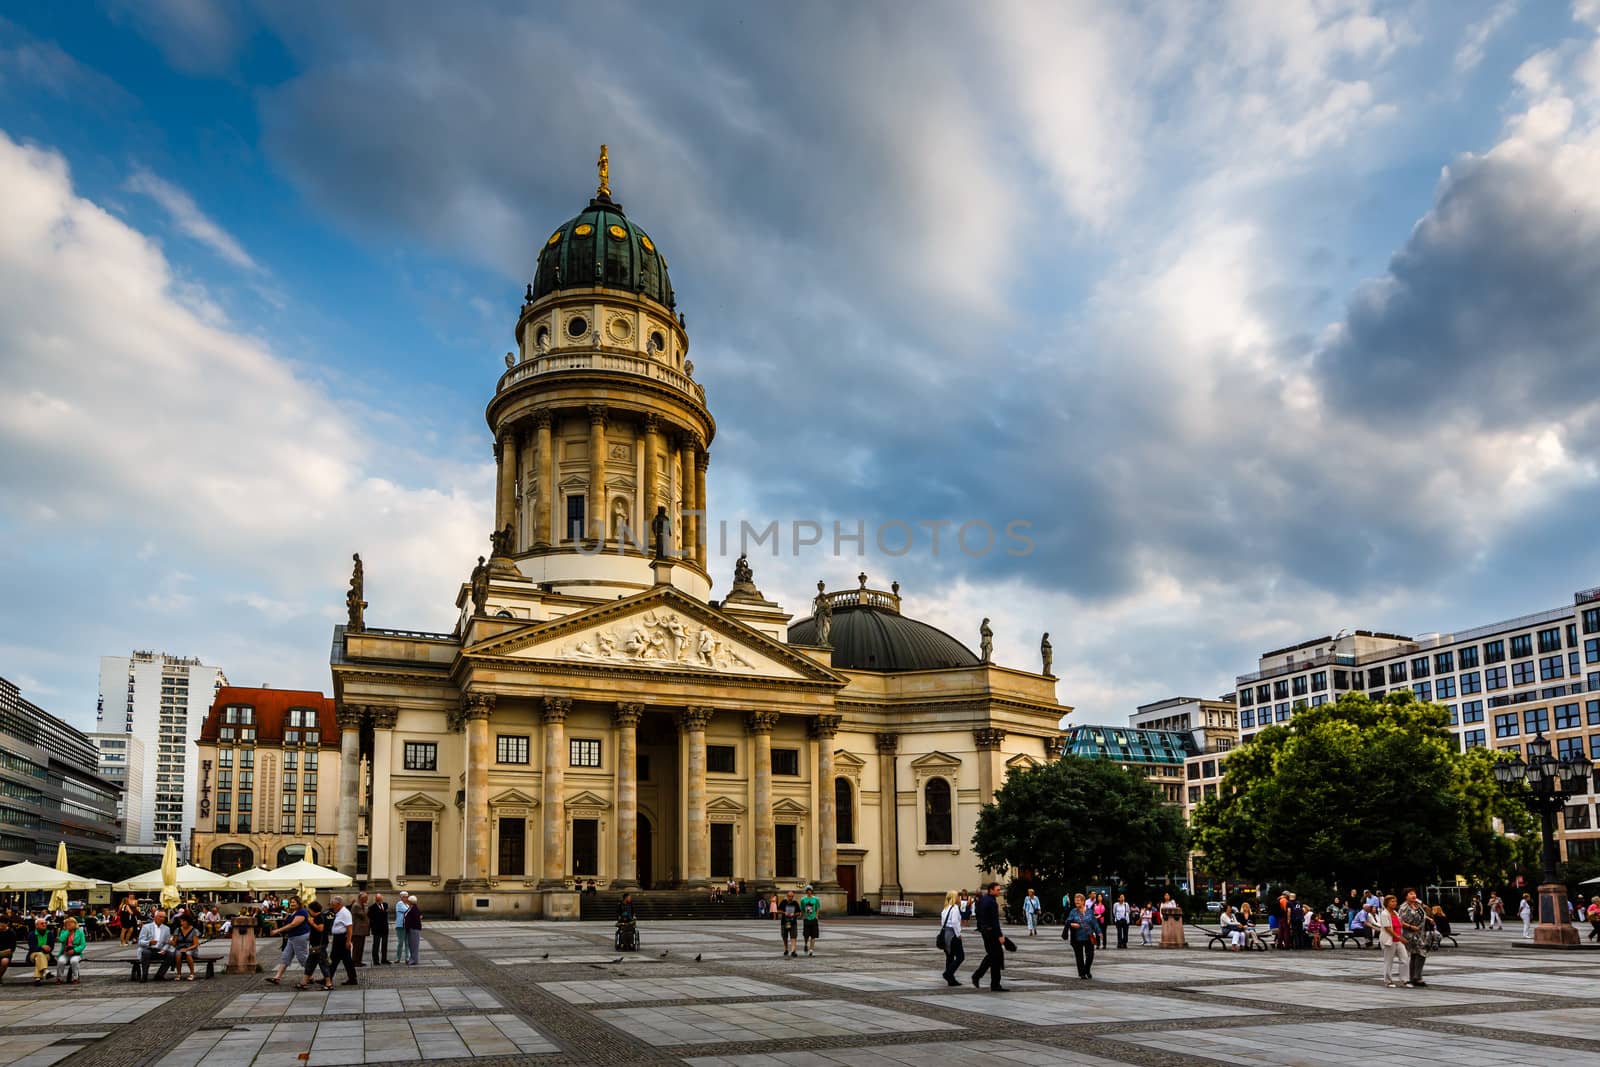 BERLIN, GERMANY - AUGUST 10: German Cathedral and Gendarmenmarkt Square on August 10, 2013 in Berlin, Germany. The square was created by Johann Arnold Nering at the end of the seventeenth century.